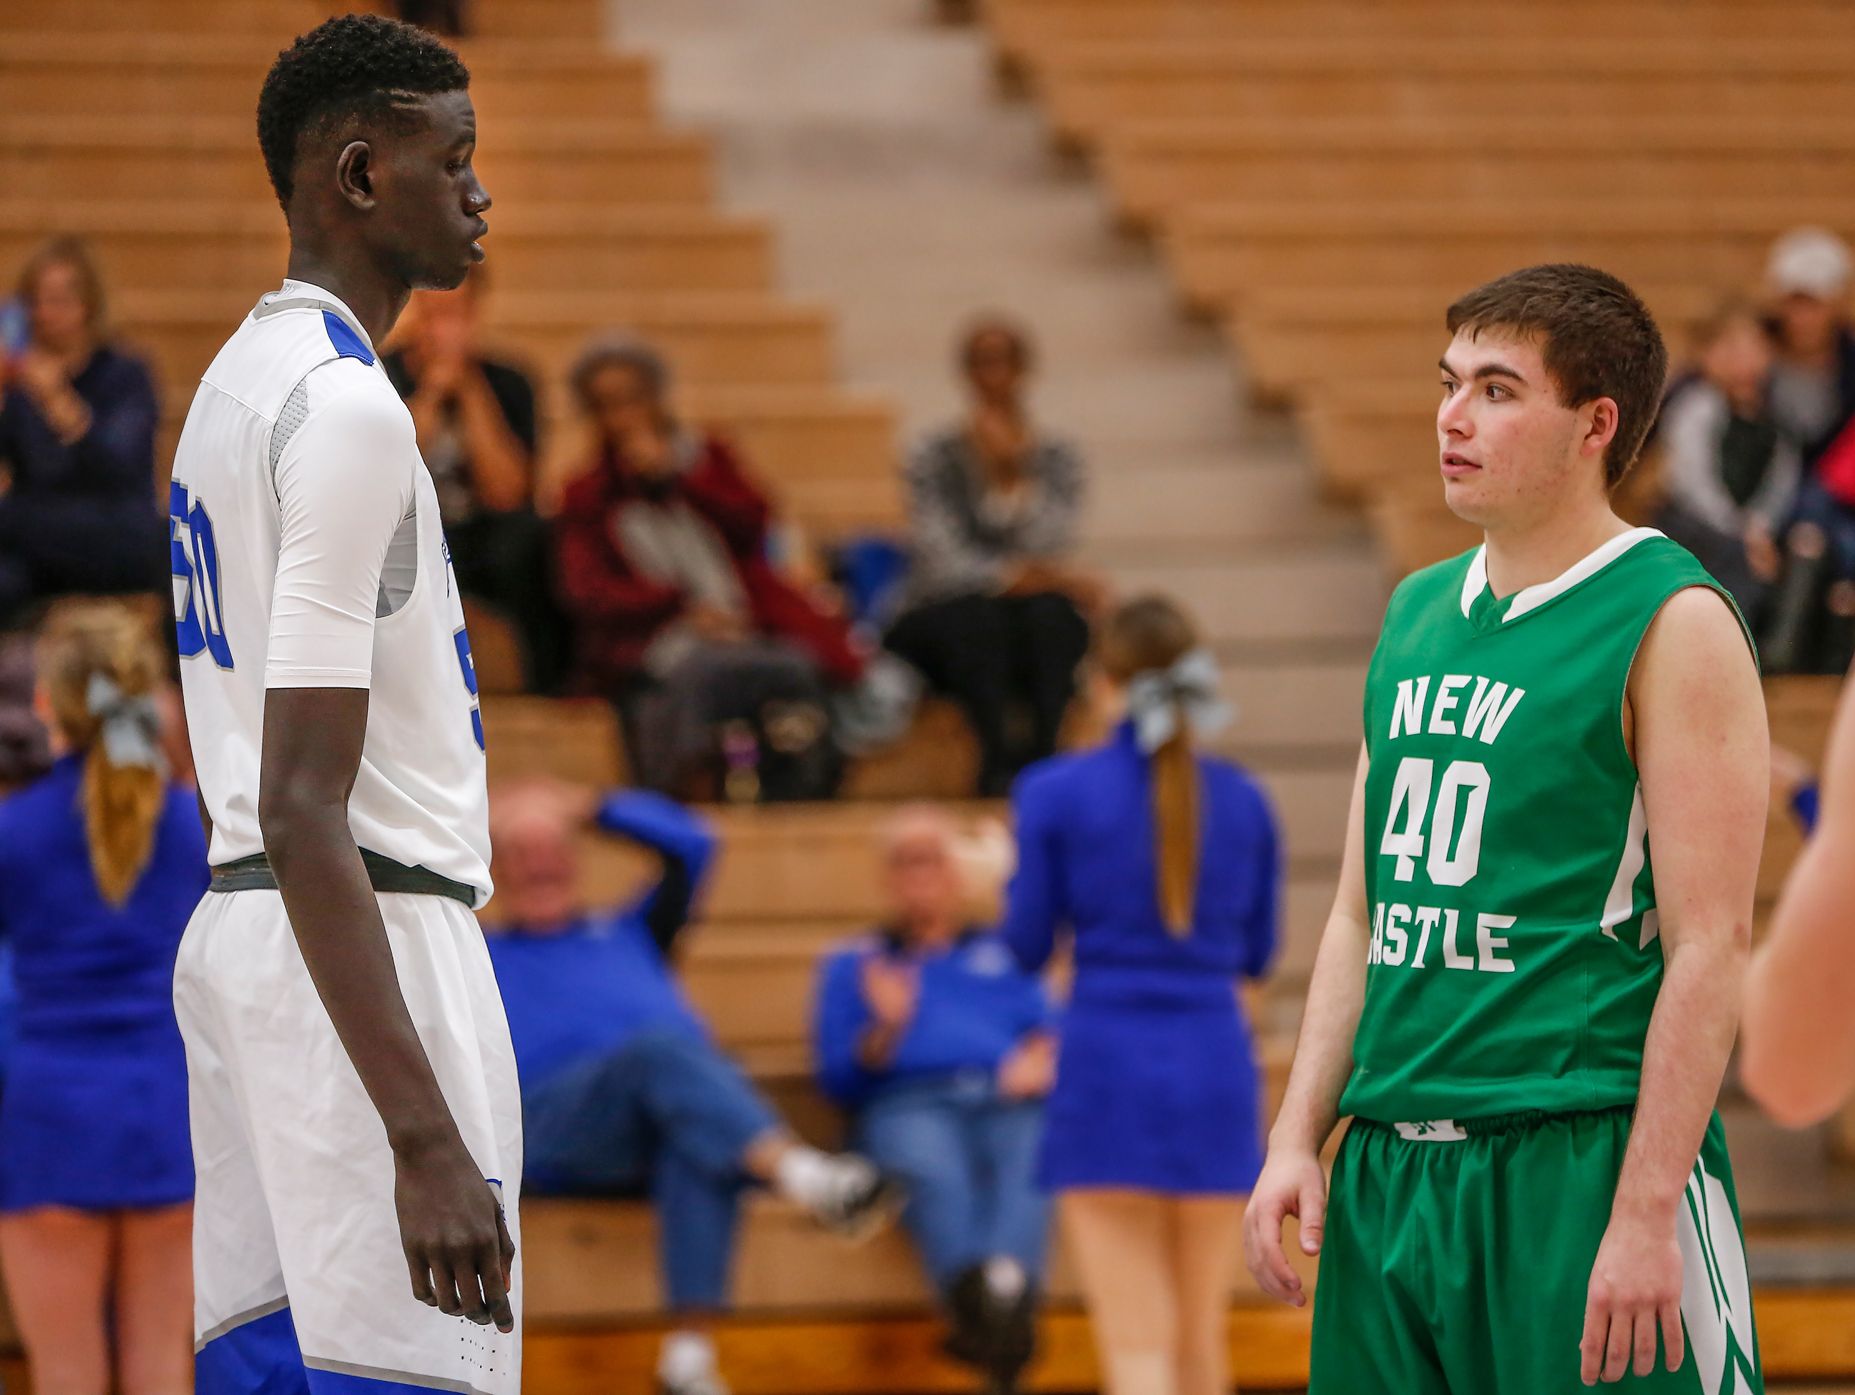 New Castle Trojans forward Bryce Webb (40) reacts after seeing Hamilton Southeastern Royals center Mabor Majak (50) just before tip-off in their junior varsity game on Tuesday, Feb. 7, 2017. Majak, who is 7 feet 1 inch tall, won the tip.